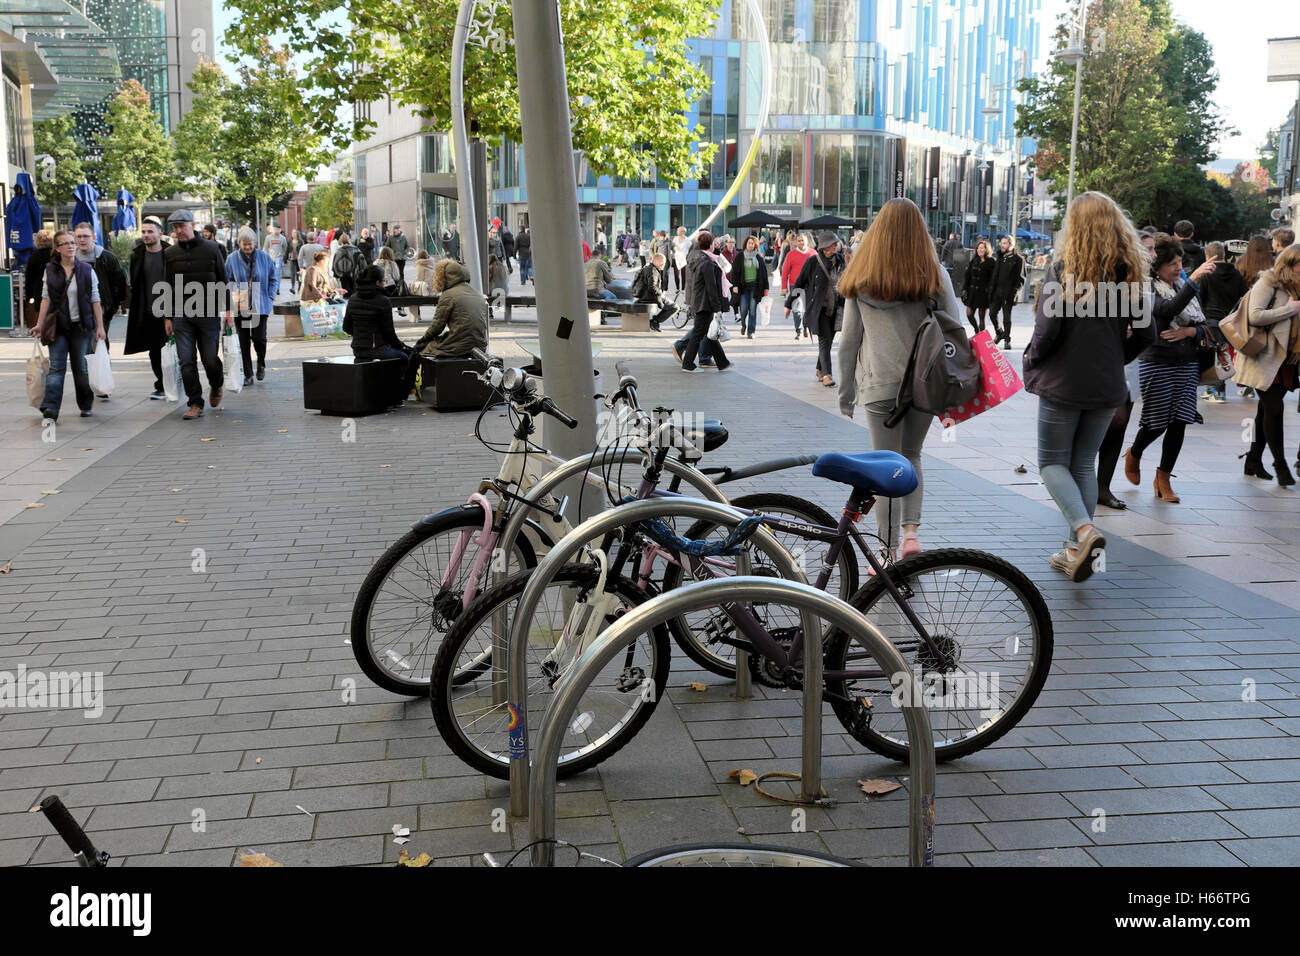 People walking and bicycles along pedestrianised shopping street of Cardiff City Centre, Wales UK  KATHY DEWITT Stock Photo